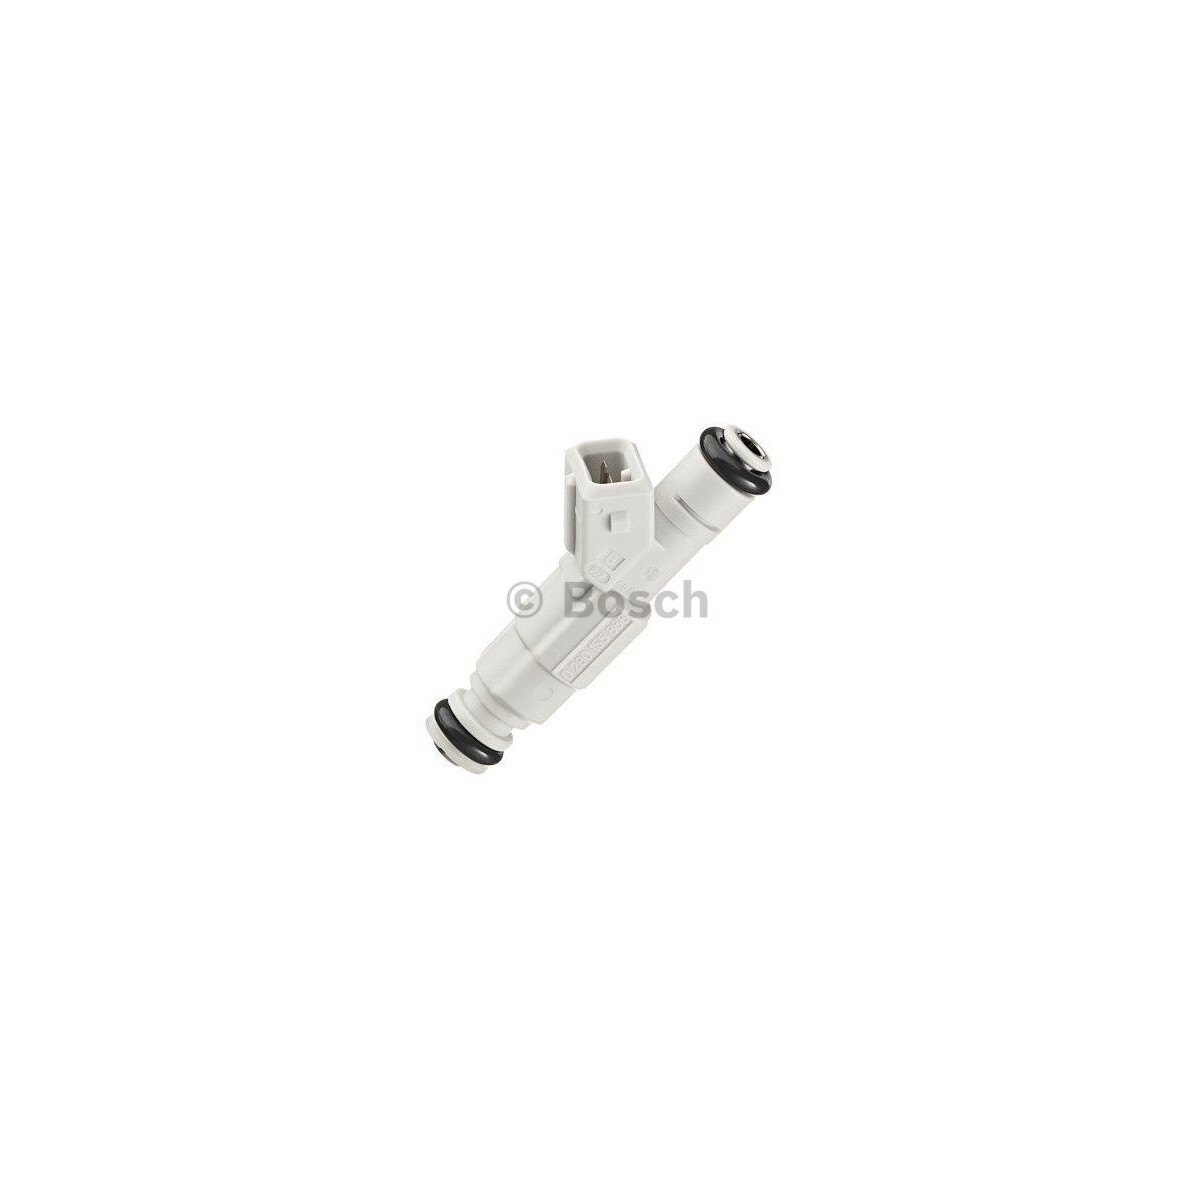 Bosch EV6 Injector, white, 380ccm (e.g. for tuned G60 with more than 250PS)